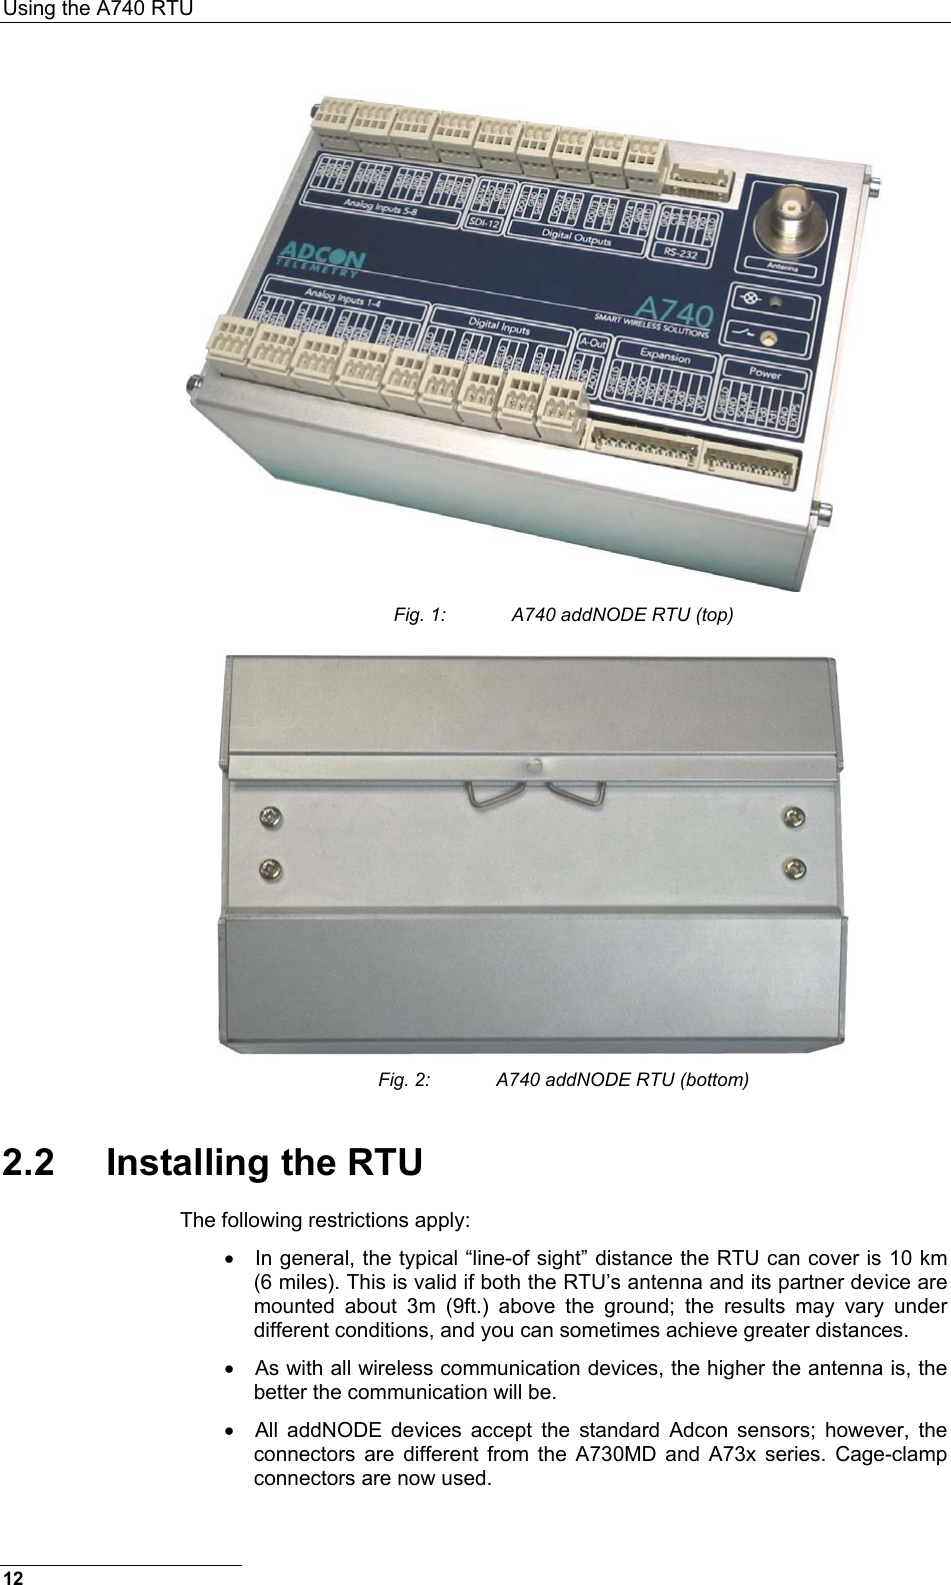 Using the A740 RTU   Fig. 1:  A740 addNODE RTU (top)  Fig. 2:  A740 addNODE RTU (bottom) 2.2 Installing the RTU The following restrictions apply: •  In general, the typical “line-of sight” distance the RTU can cover is 10 km (6 miles). This is valid if both the RTU’s antenna and its partner device are mounted about 3m (9ft.) above the ground; the results may vary under different conditions, and you can sometimes achieve greater distances. •  As with all wireless communication devices, the higher the antenna is, the better the communication will be. •  All addNODE devices accept the standard Adcon sensors; however, the connectors are different from the A730MD and A73x series. Cage-clamp connectors are now used.  12 